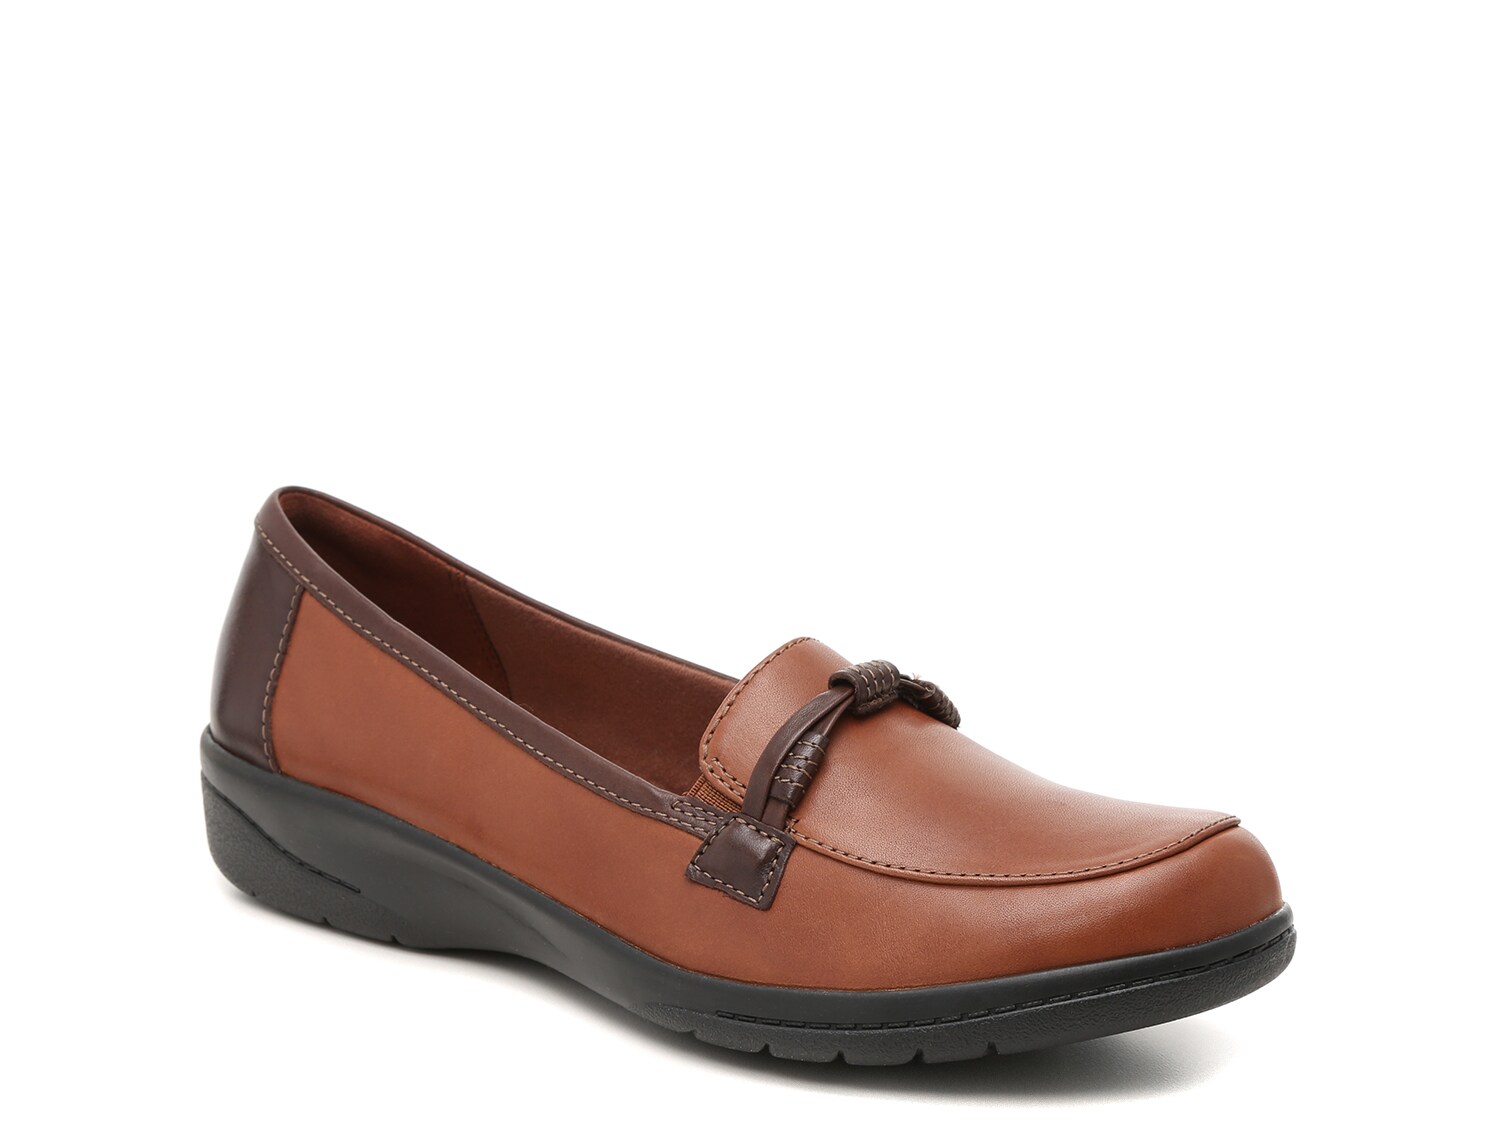 clarks collection loafers